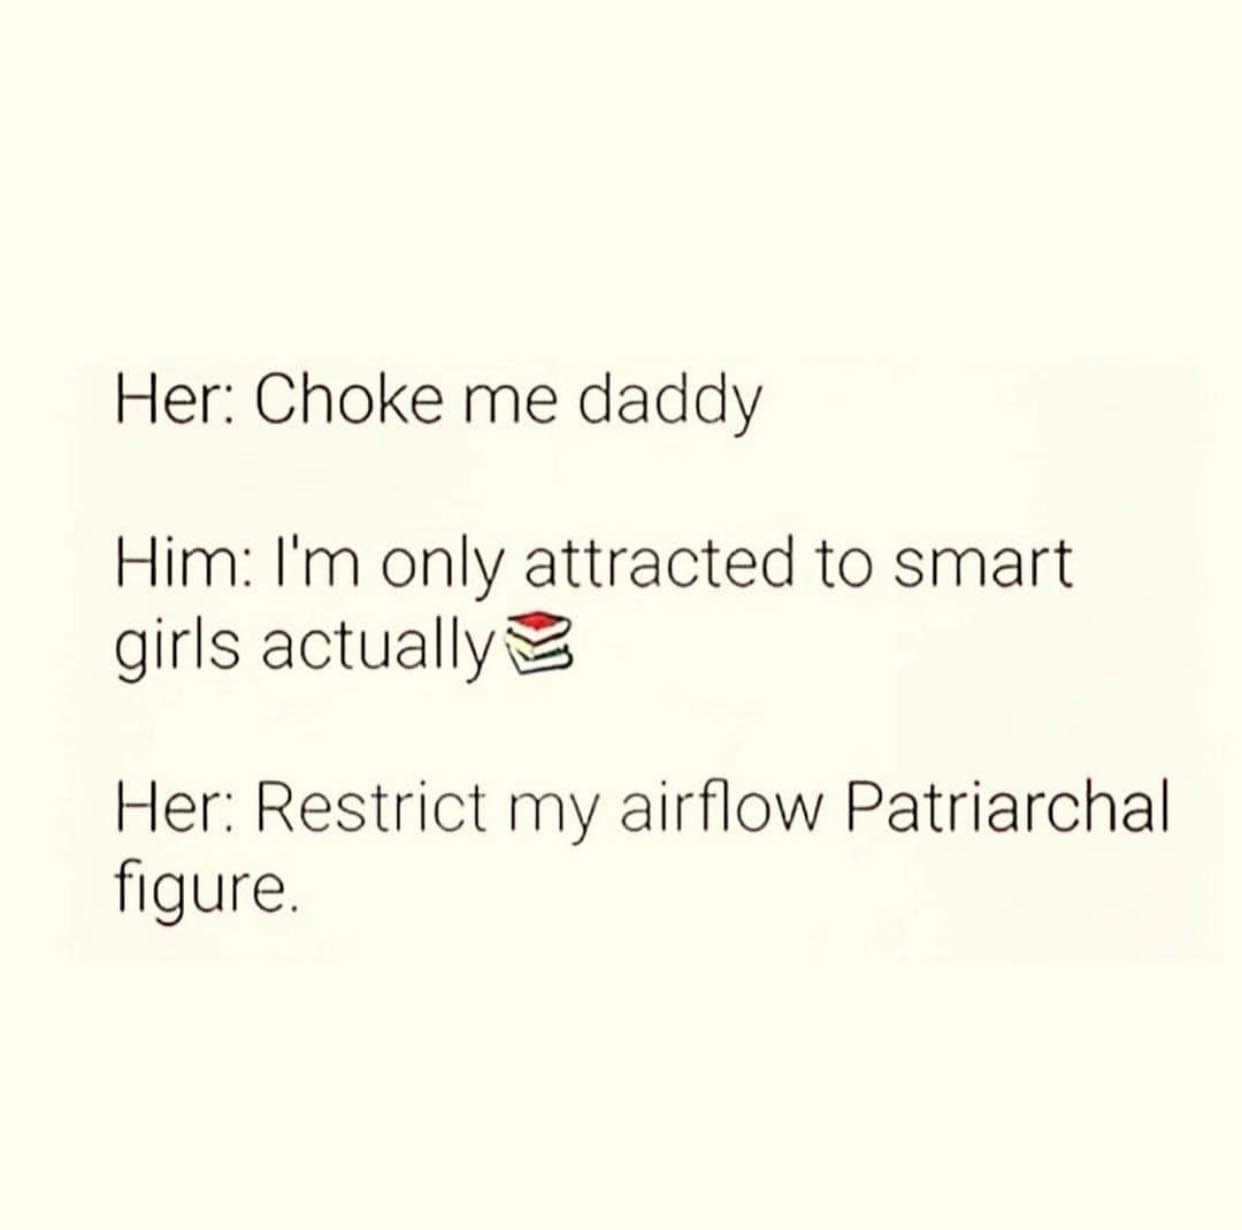 document - Her Choke me daddy Him I'm only attracted to smart girls actually Her Restrict my airflow Patriarchal figure.